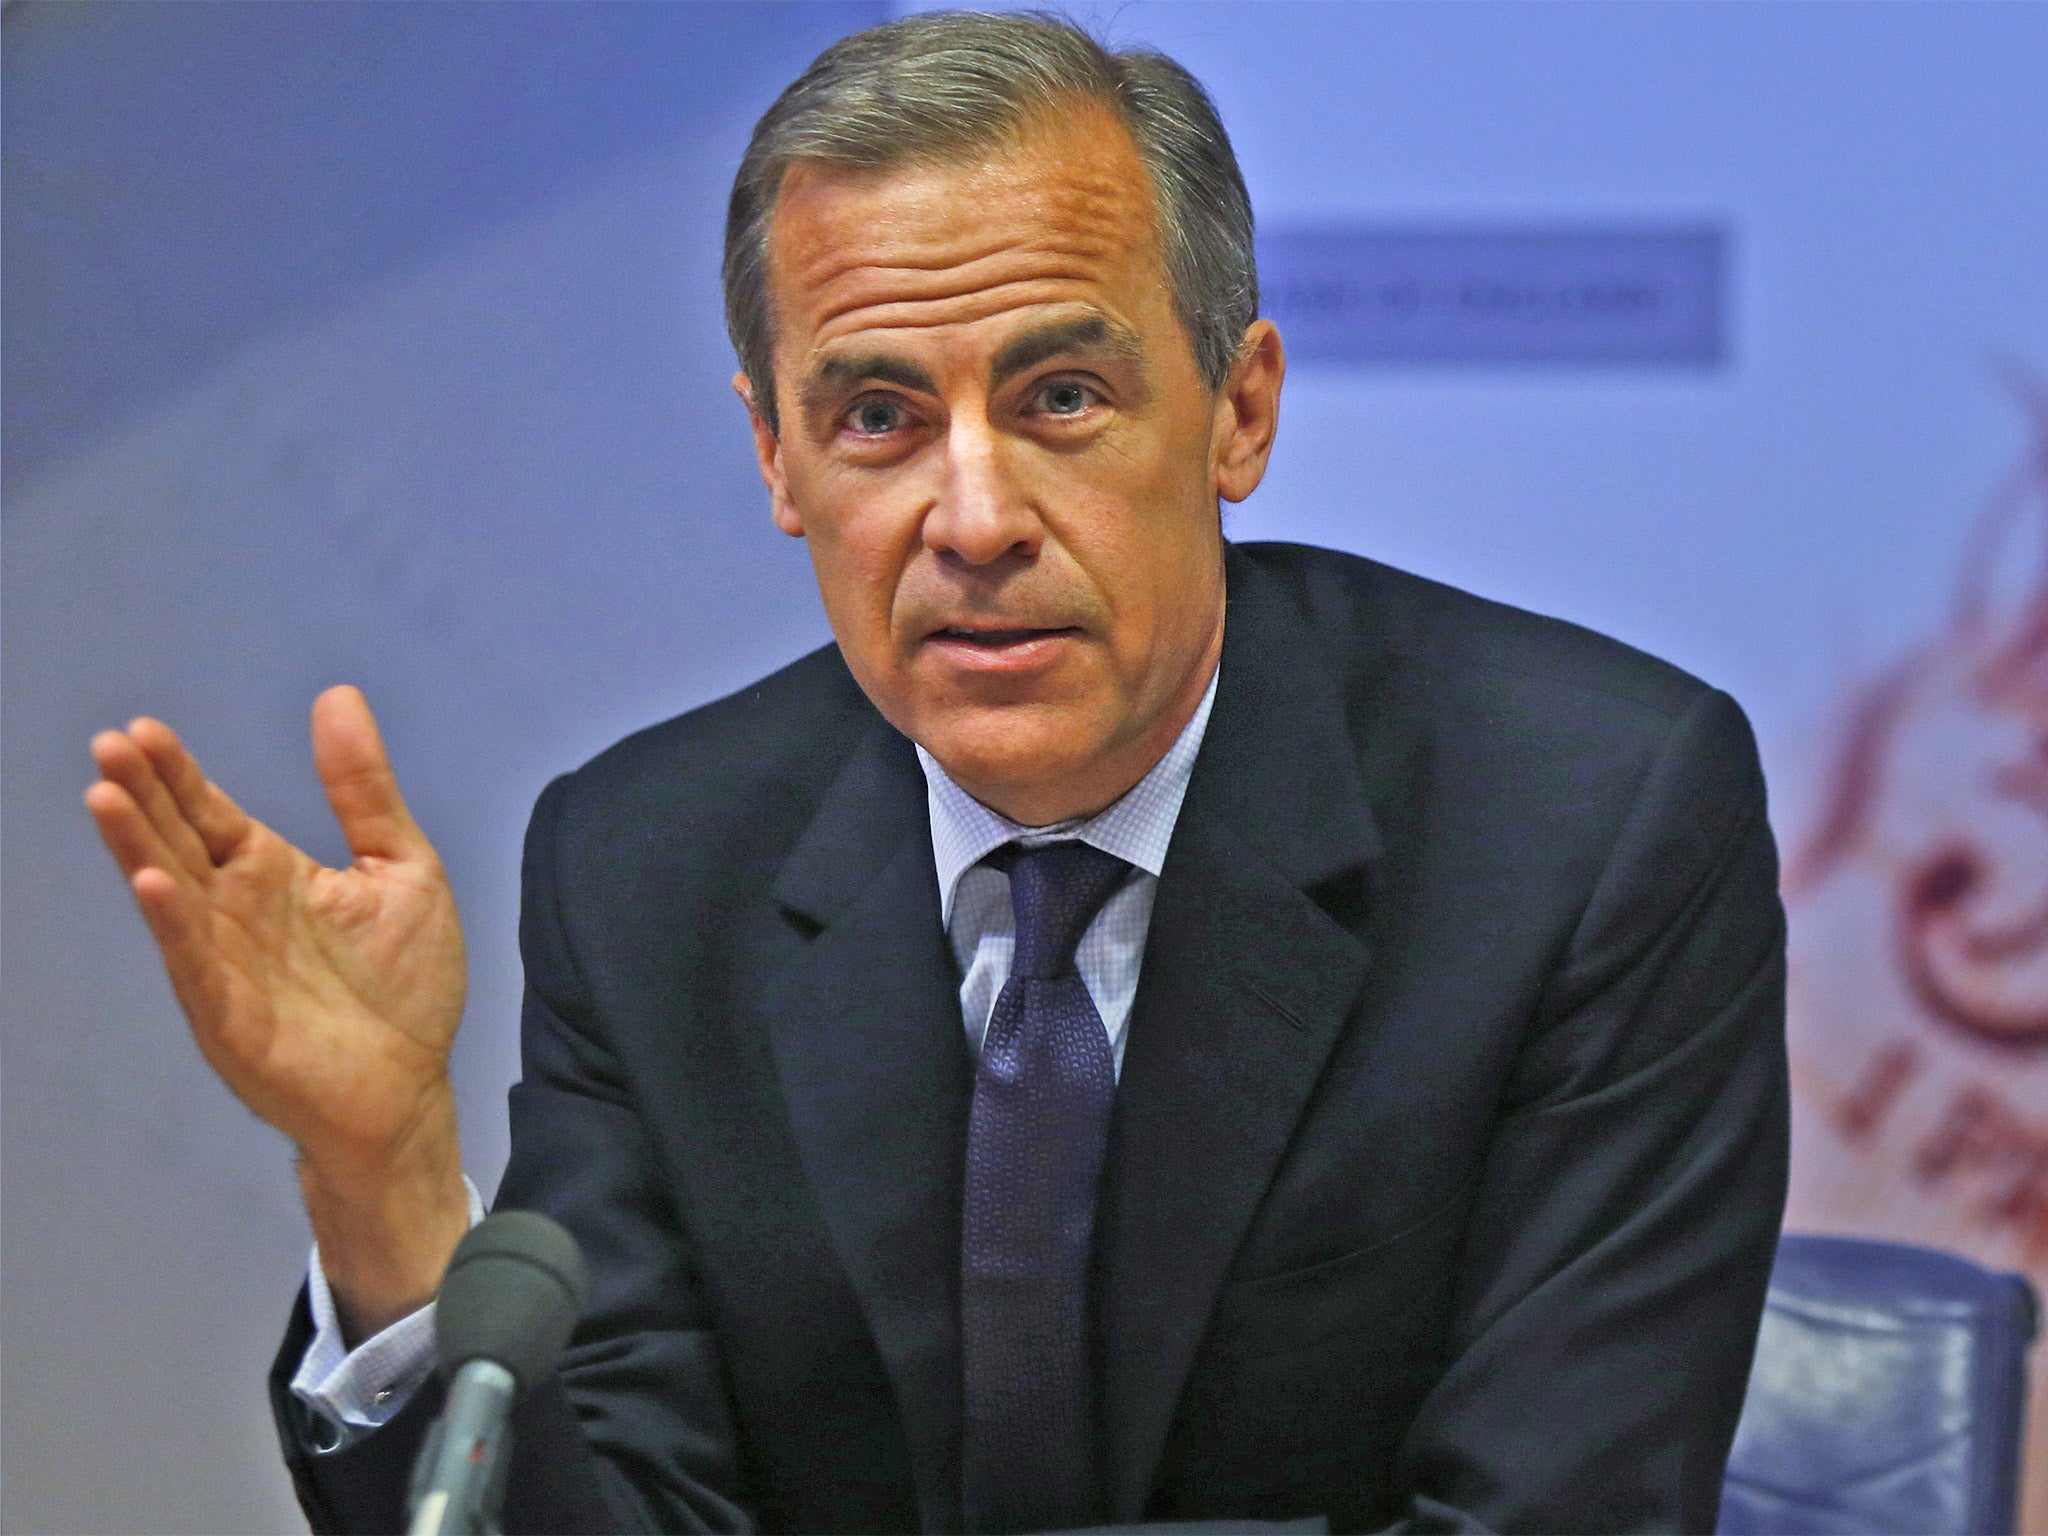 FPC chairman and the governor of the Bank of England, Mark Carney